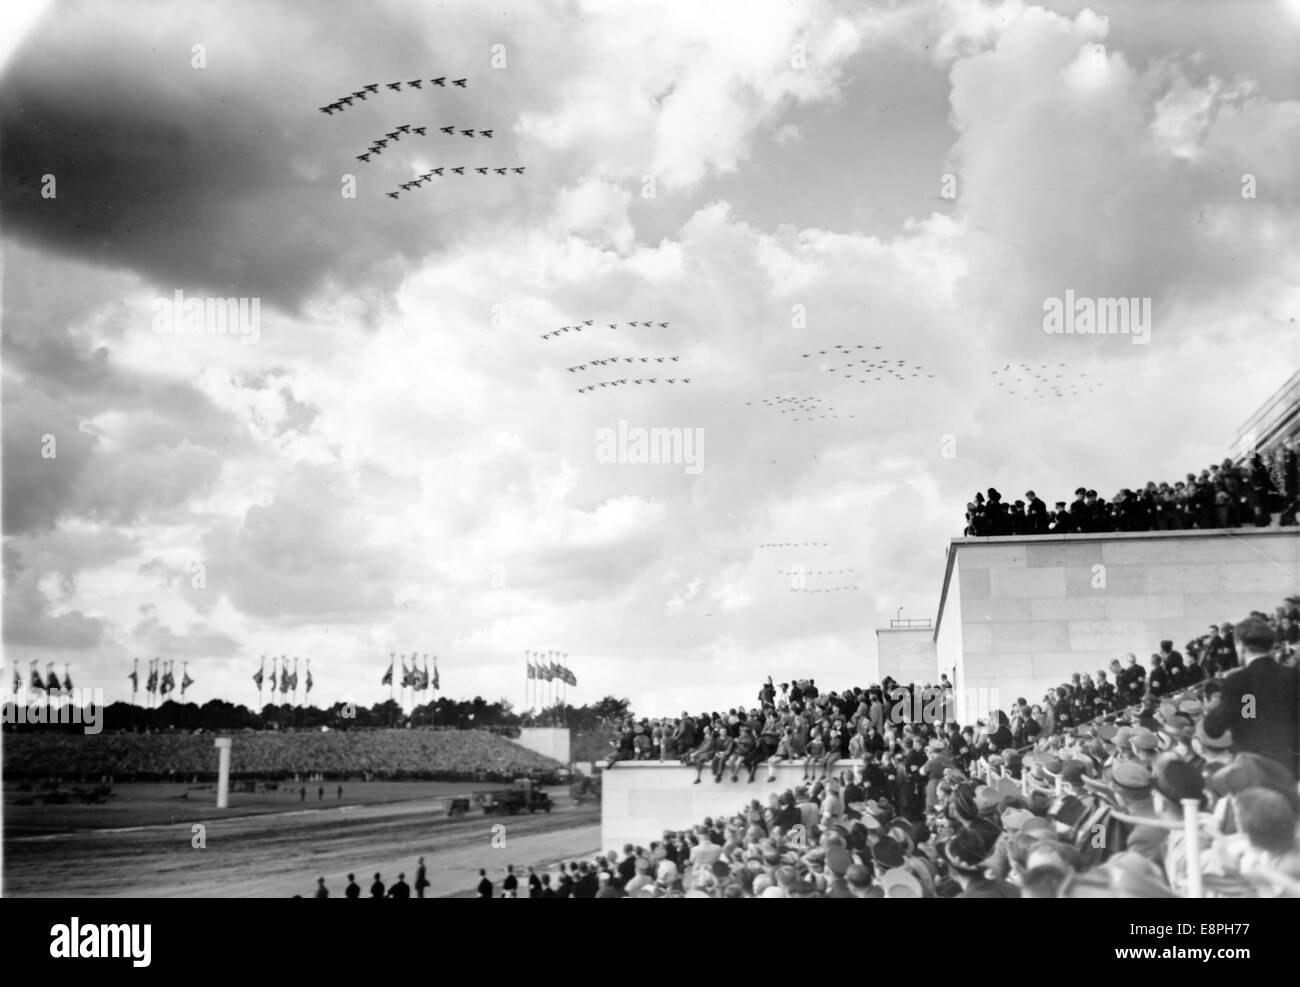 Nuremberg Rally 1937 in Nuremberg, Germany - Demonstration of the German Wehrmacht (armed forces) on Zeppelin Field at the Nazi party rally grounds, here the German air force. (Flaws in quality due to the historic picture copy) Fotoarchiv für Zeitgeschichtee - NO WIRE SERVICE - Stock Photo